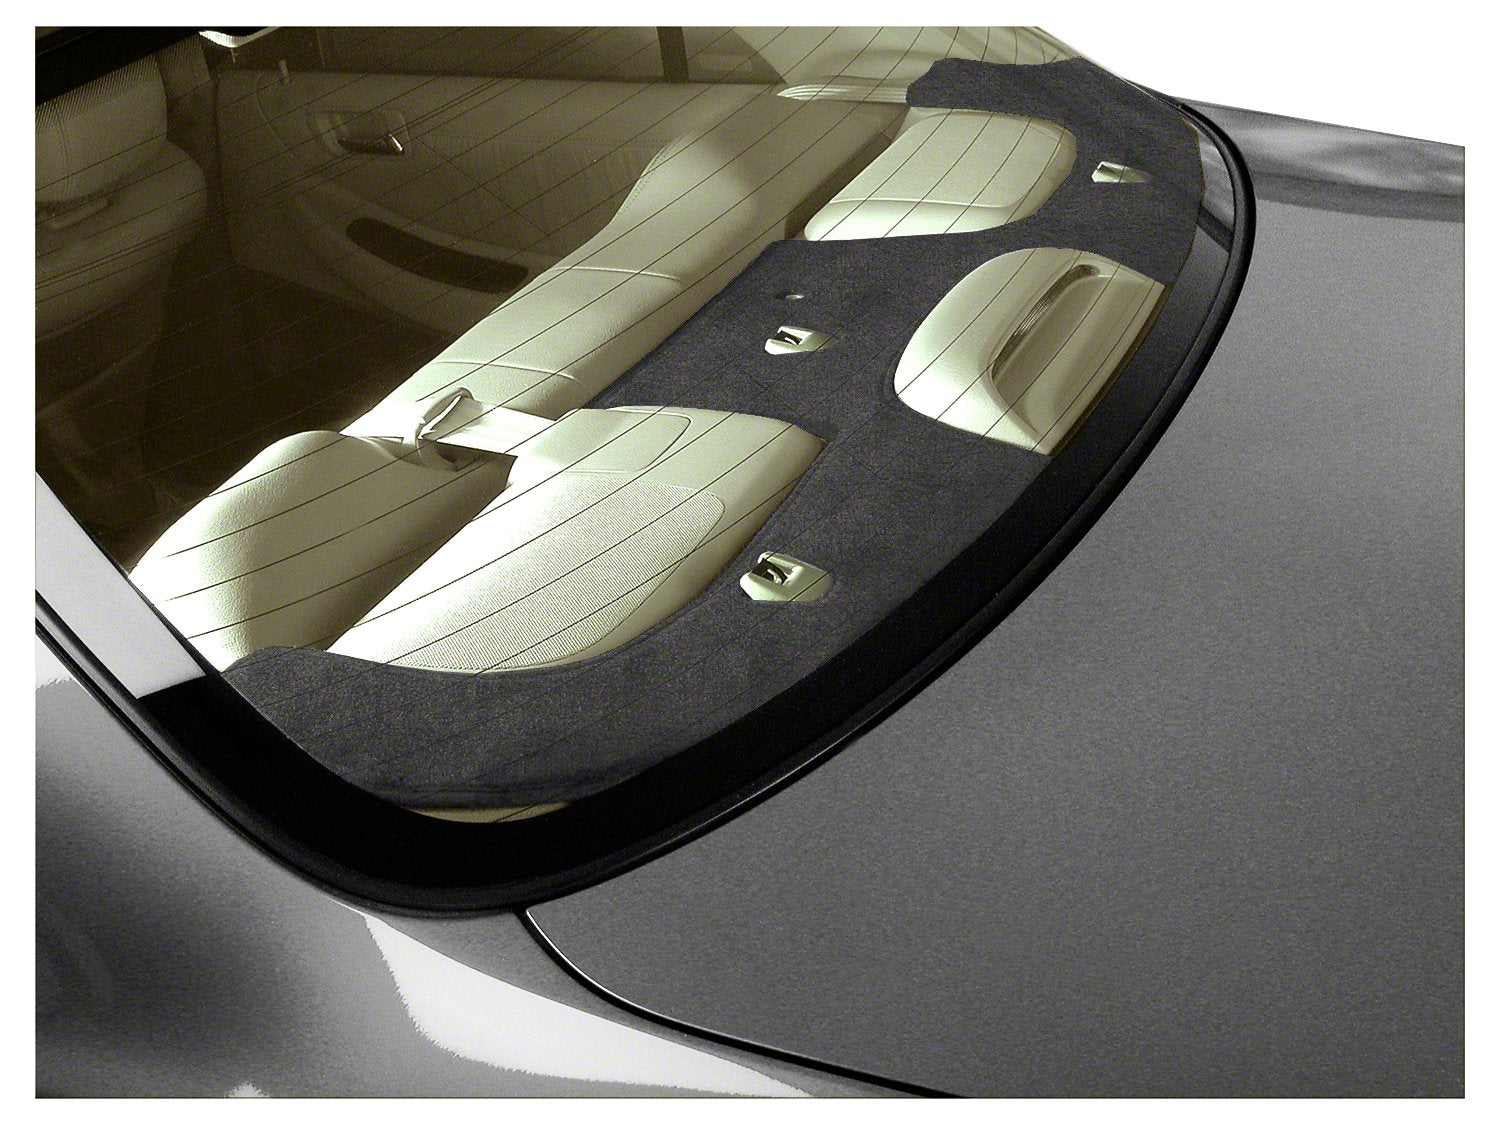 2010 Cadillac DTS Rear Deck Cover